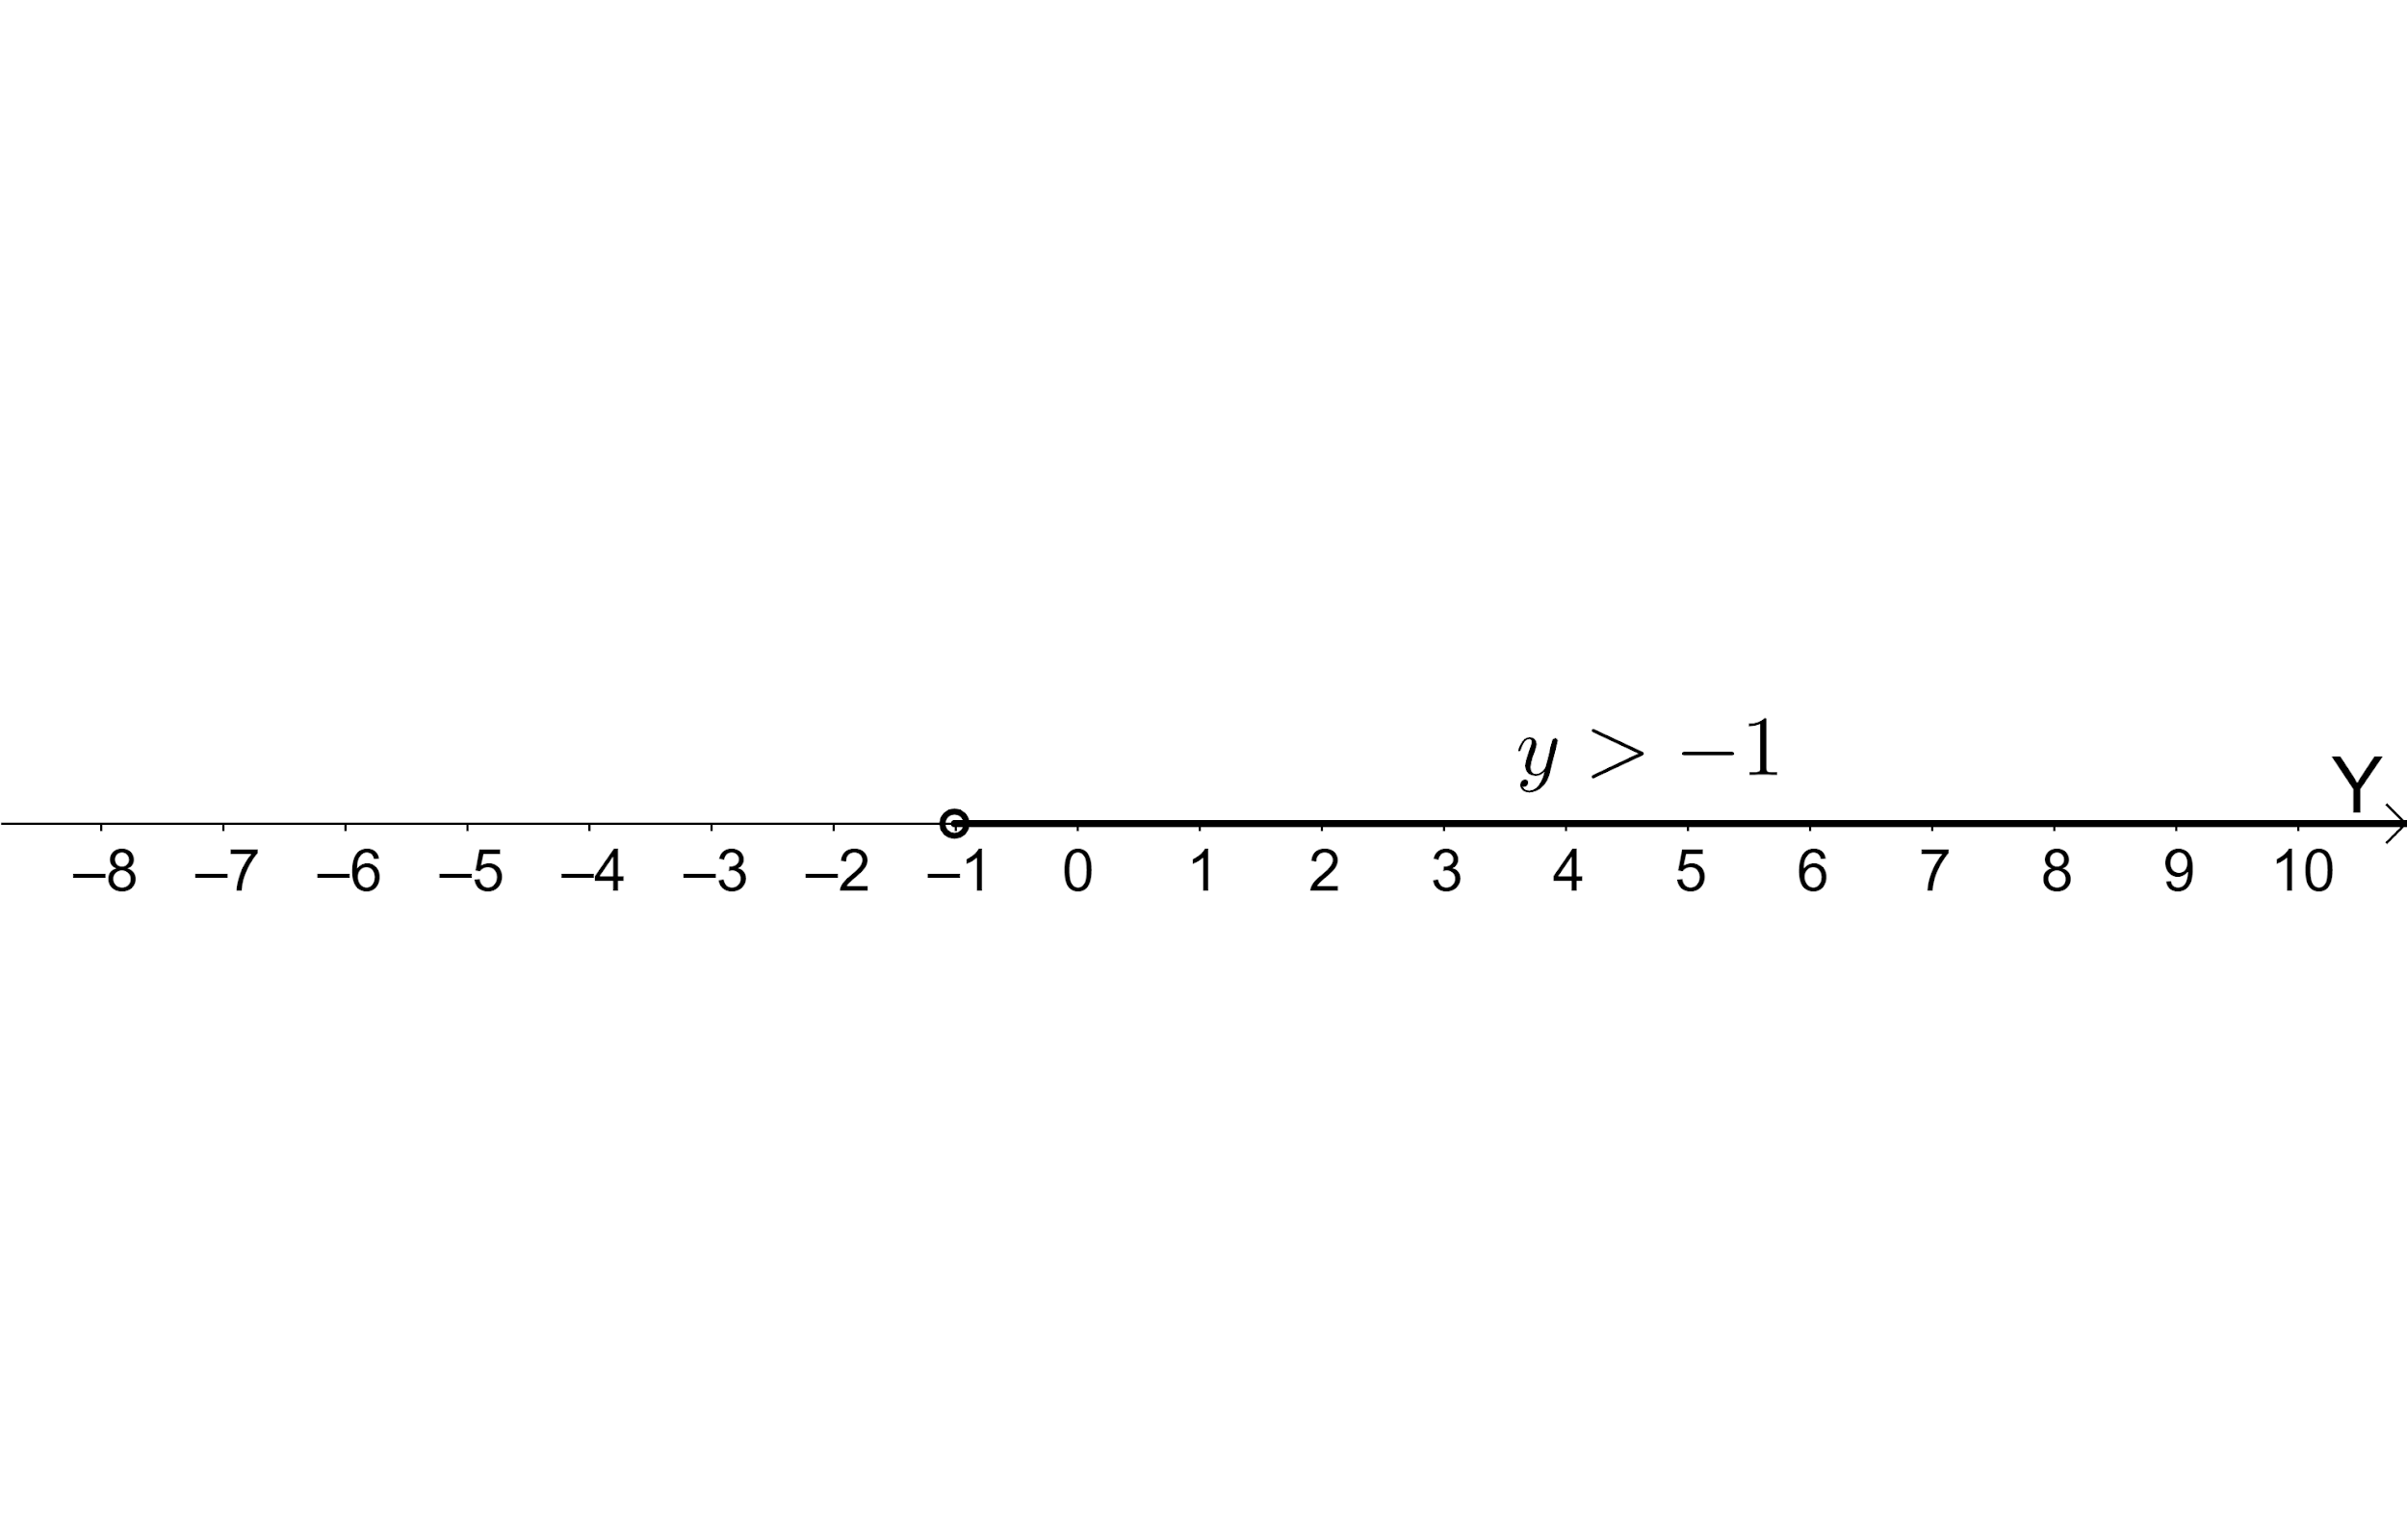 6 Ways to Use a Number Line - wikiHow